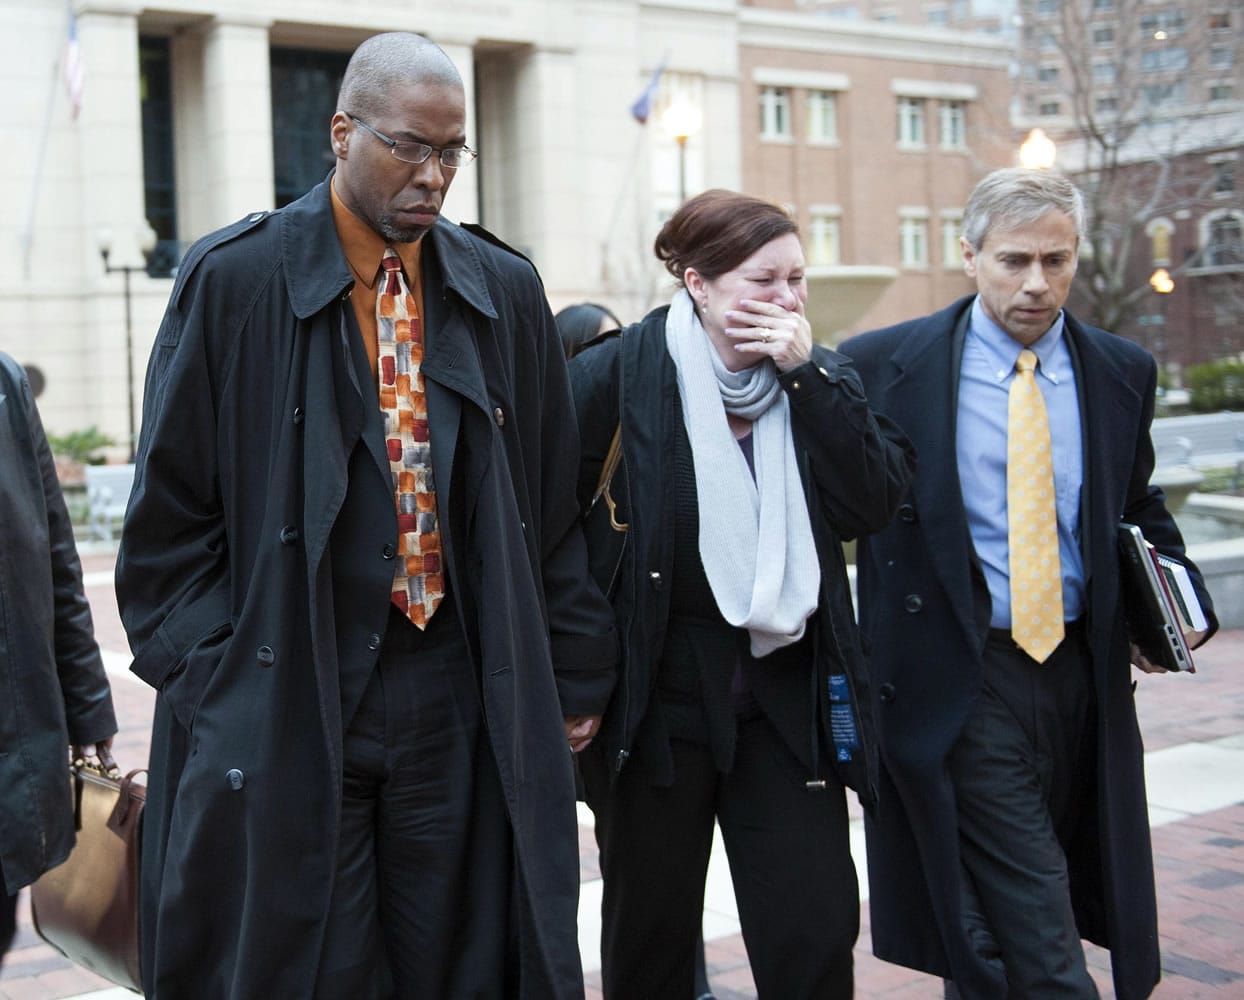 Former CIA officer Jeffrey Sterling, left, leaves the Alexandria Federal Courthouse Monday in Alexandria, Va., with his wife, Holly, and attorney Barry Pollack, after being convicted on all counts he faced of leaking classified details of an operation to a reporter.